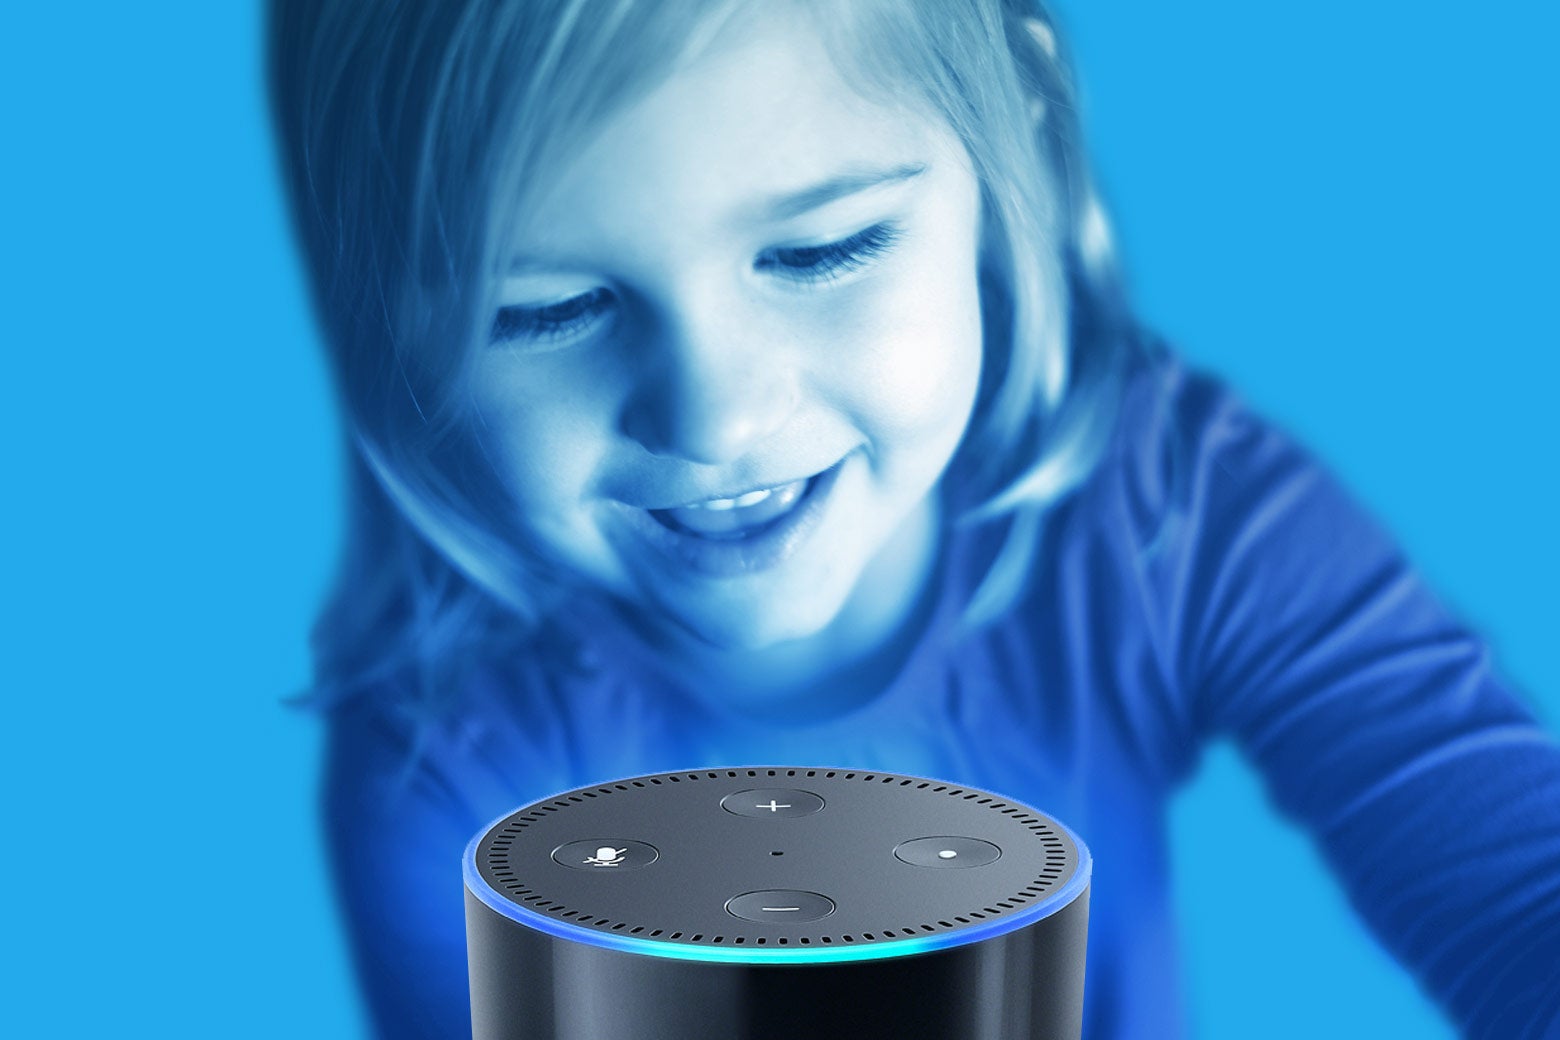 A child speaking to an Echo.